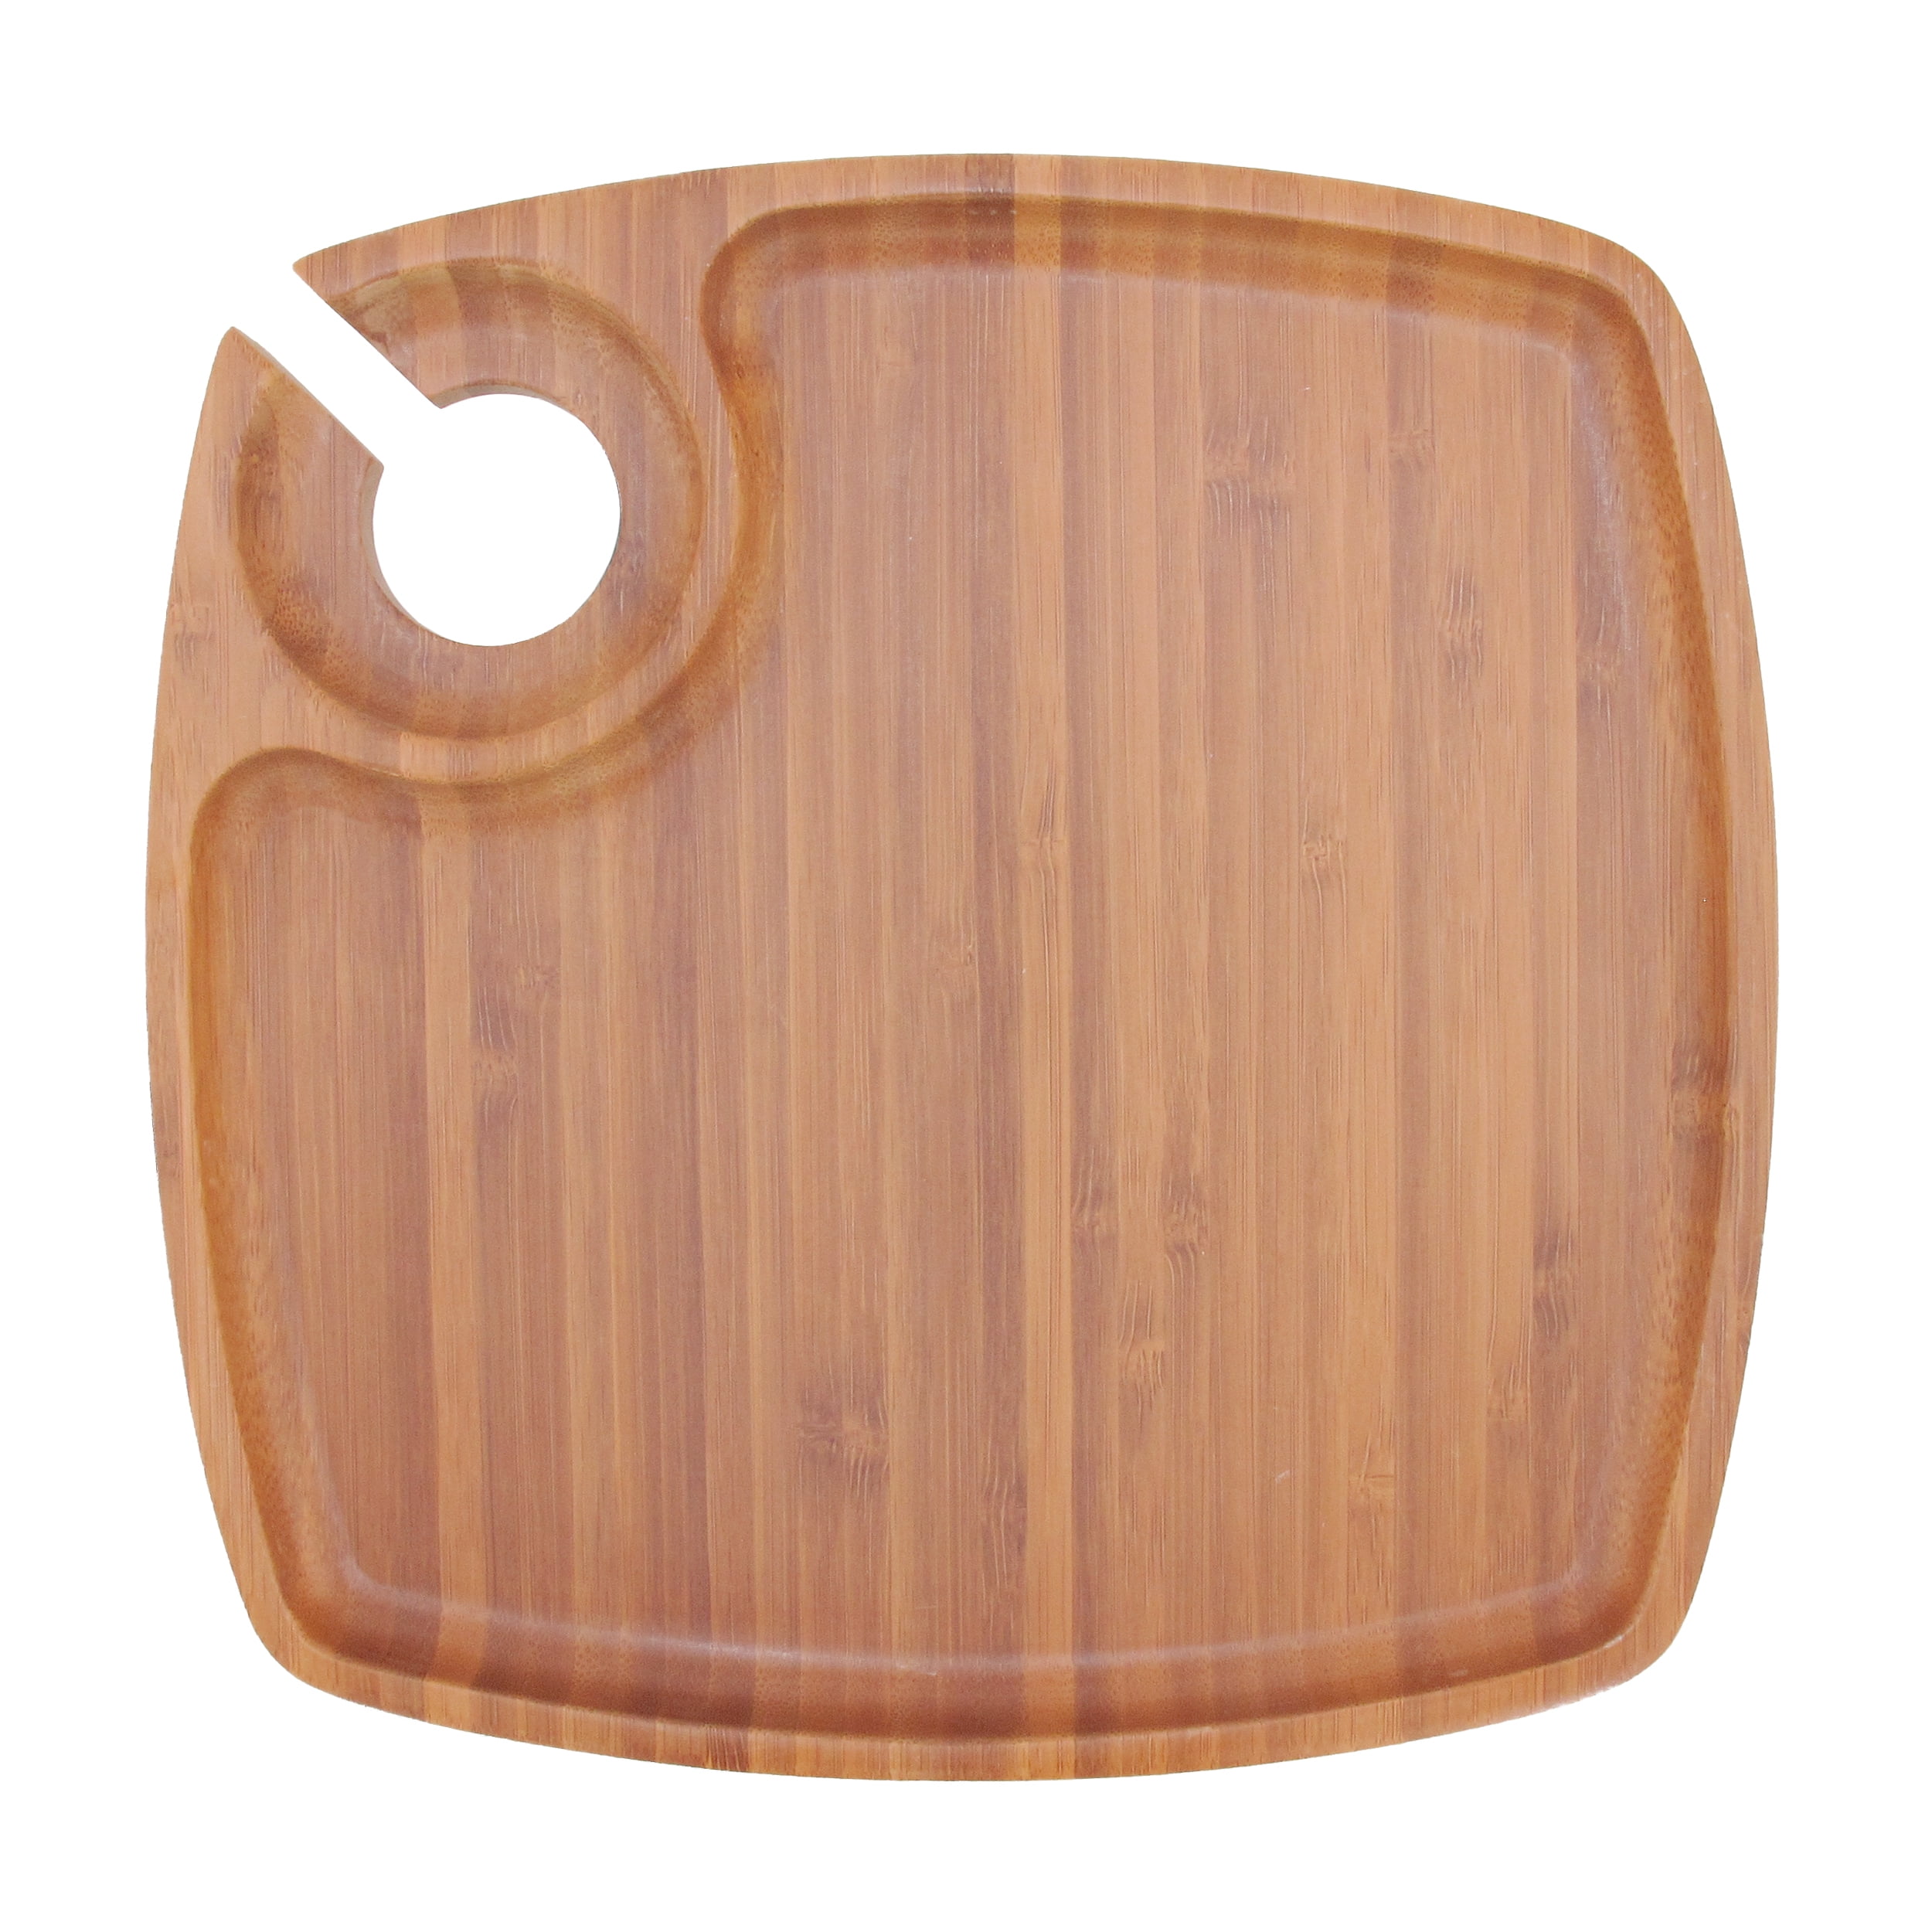 BambooMN 10 x 10 Bamboo Ecoware Reusable Dinnerware Square Plates for Catered Events Holidays or Home Use Supplies 30 Pcs 